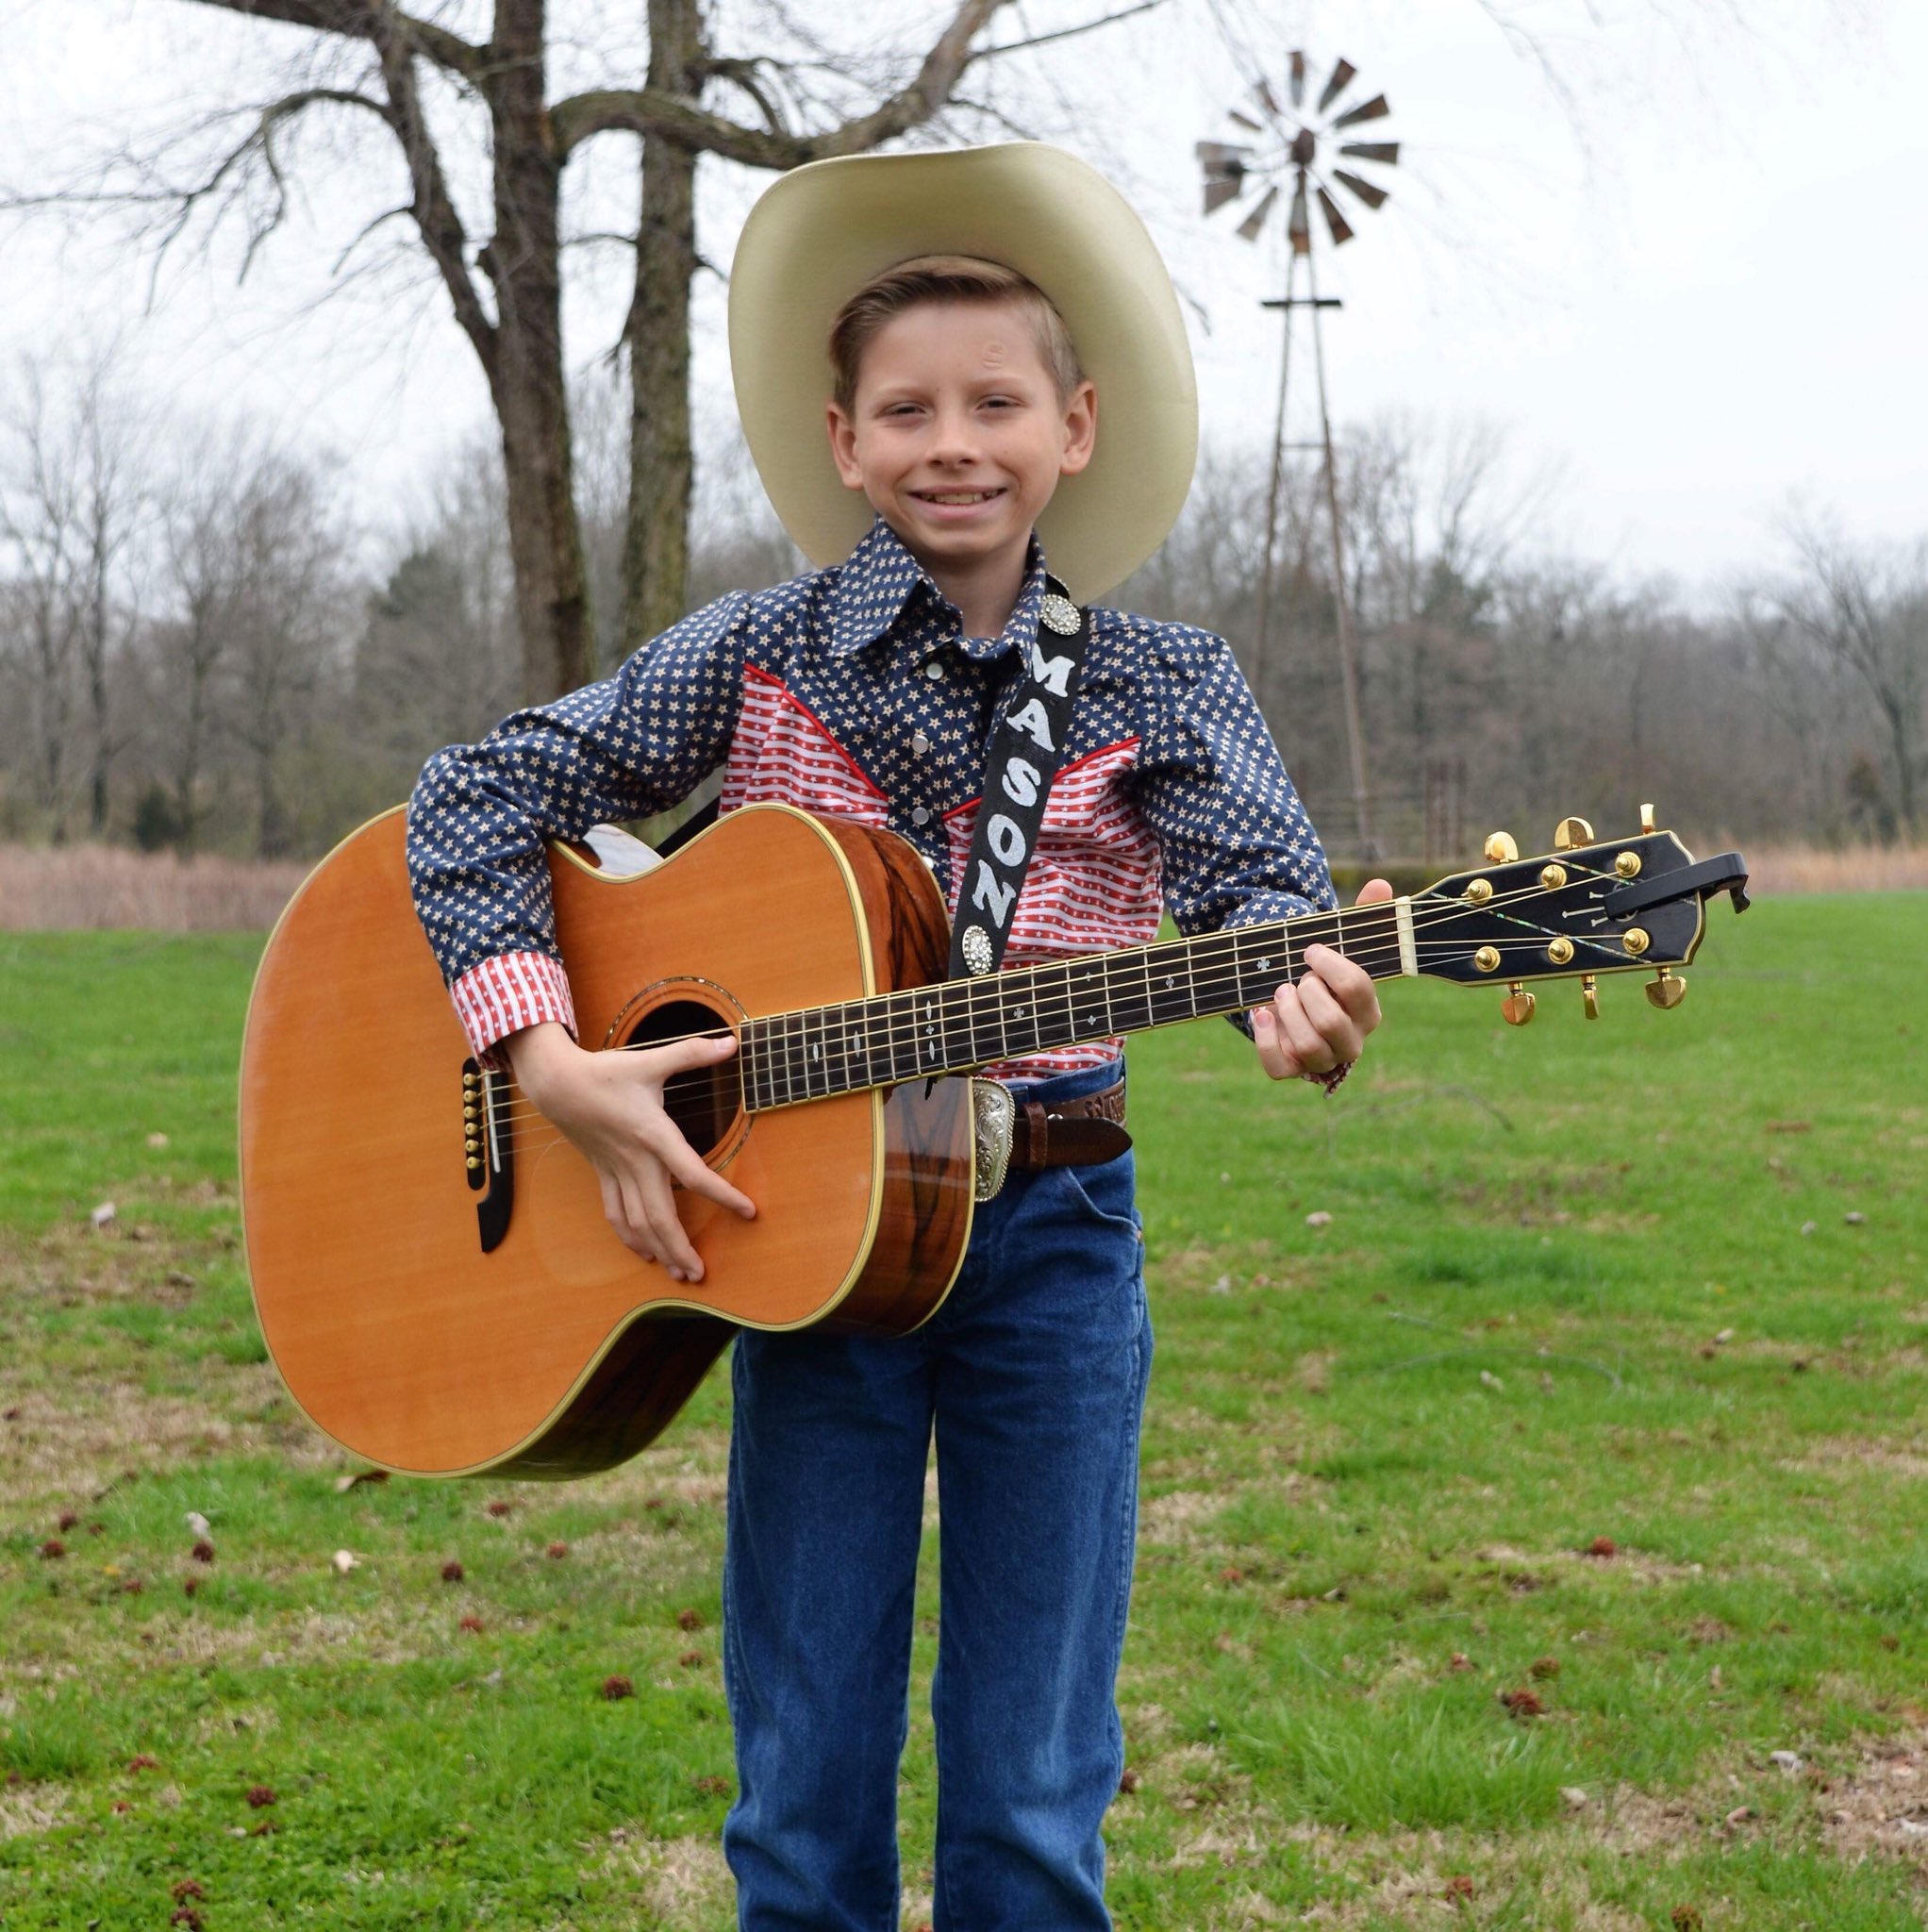 Mason Ramsey on Twitter: "I just want to thank everyone for all the  support!… "